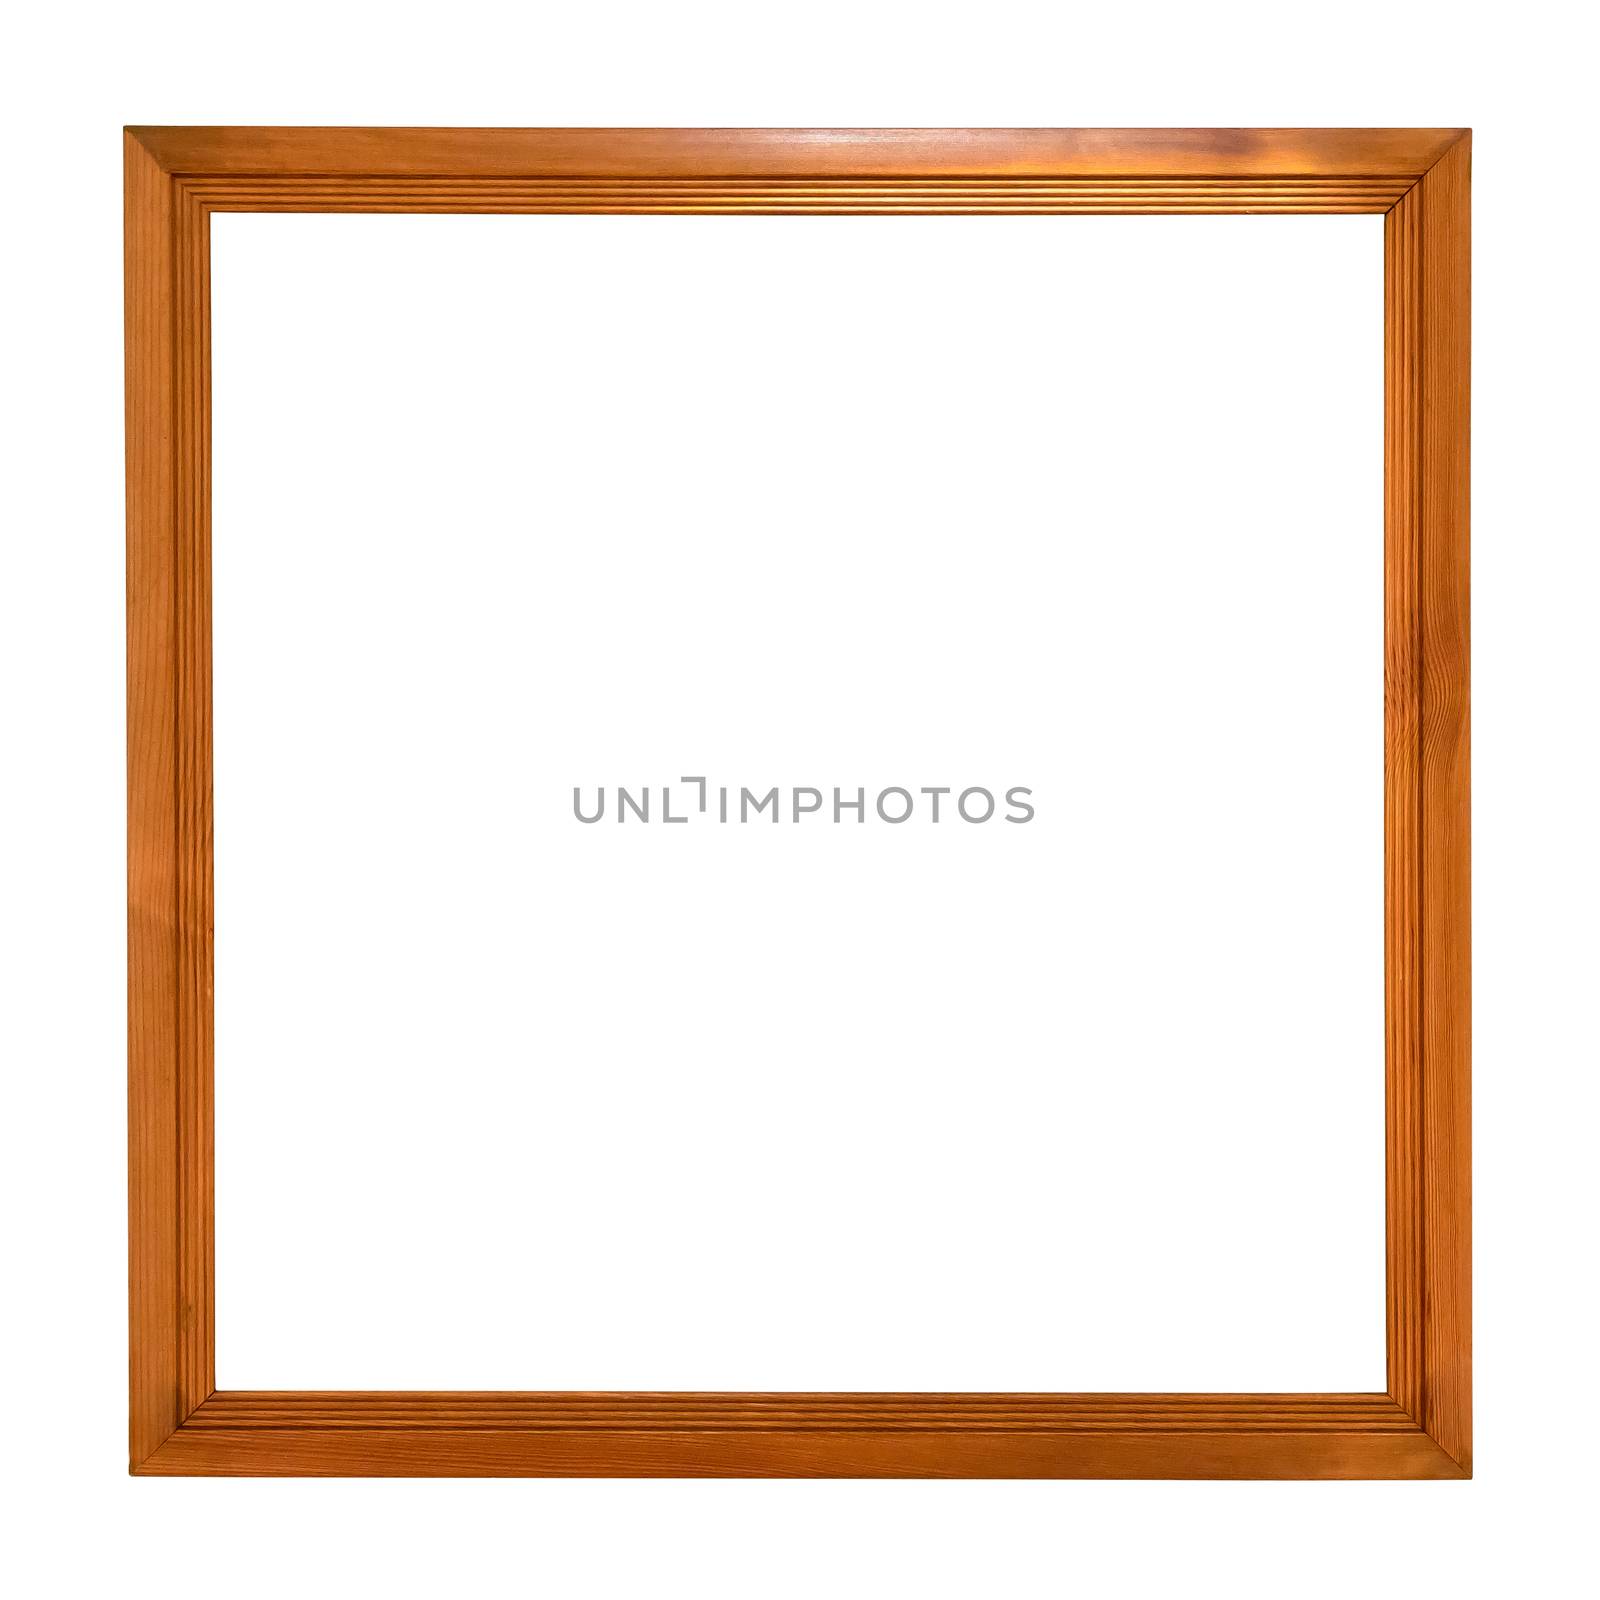 Square wooden picture frame on white background by mkos83